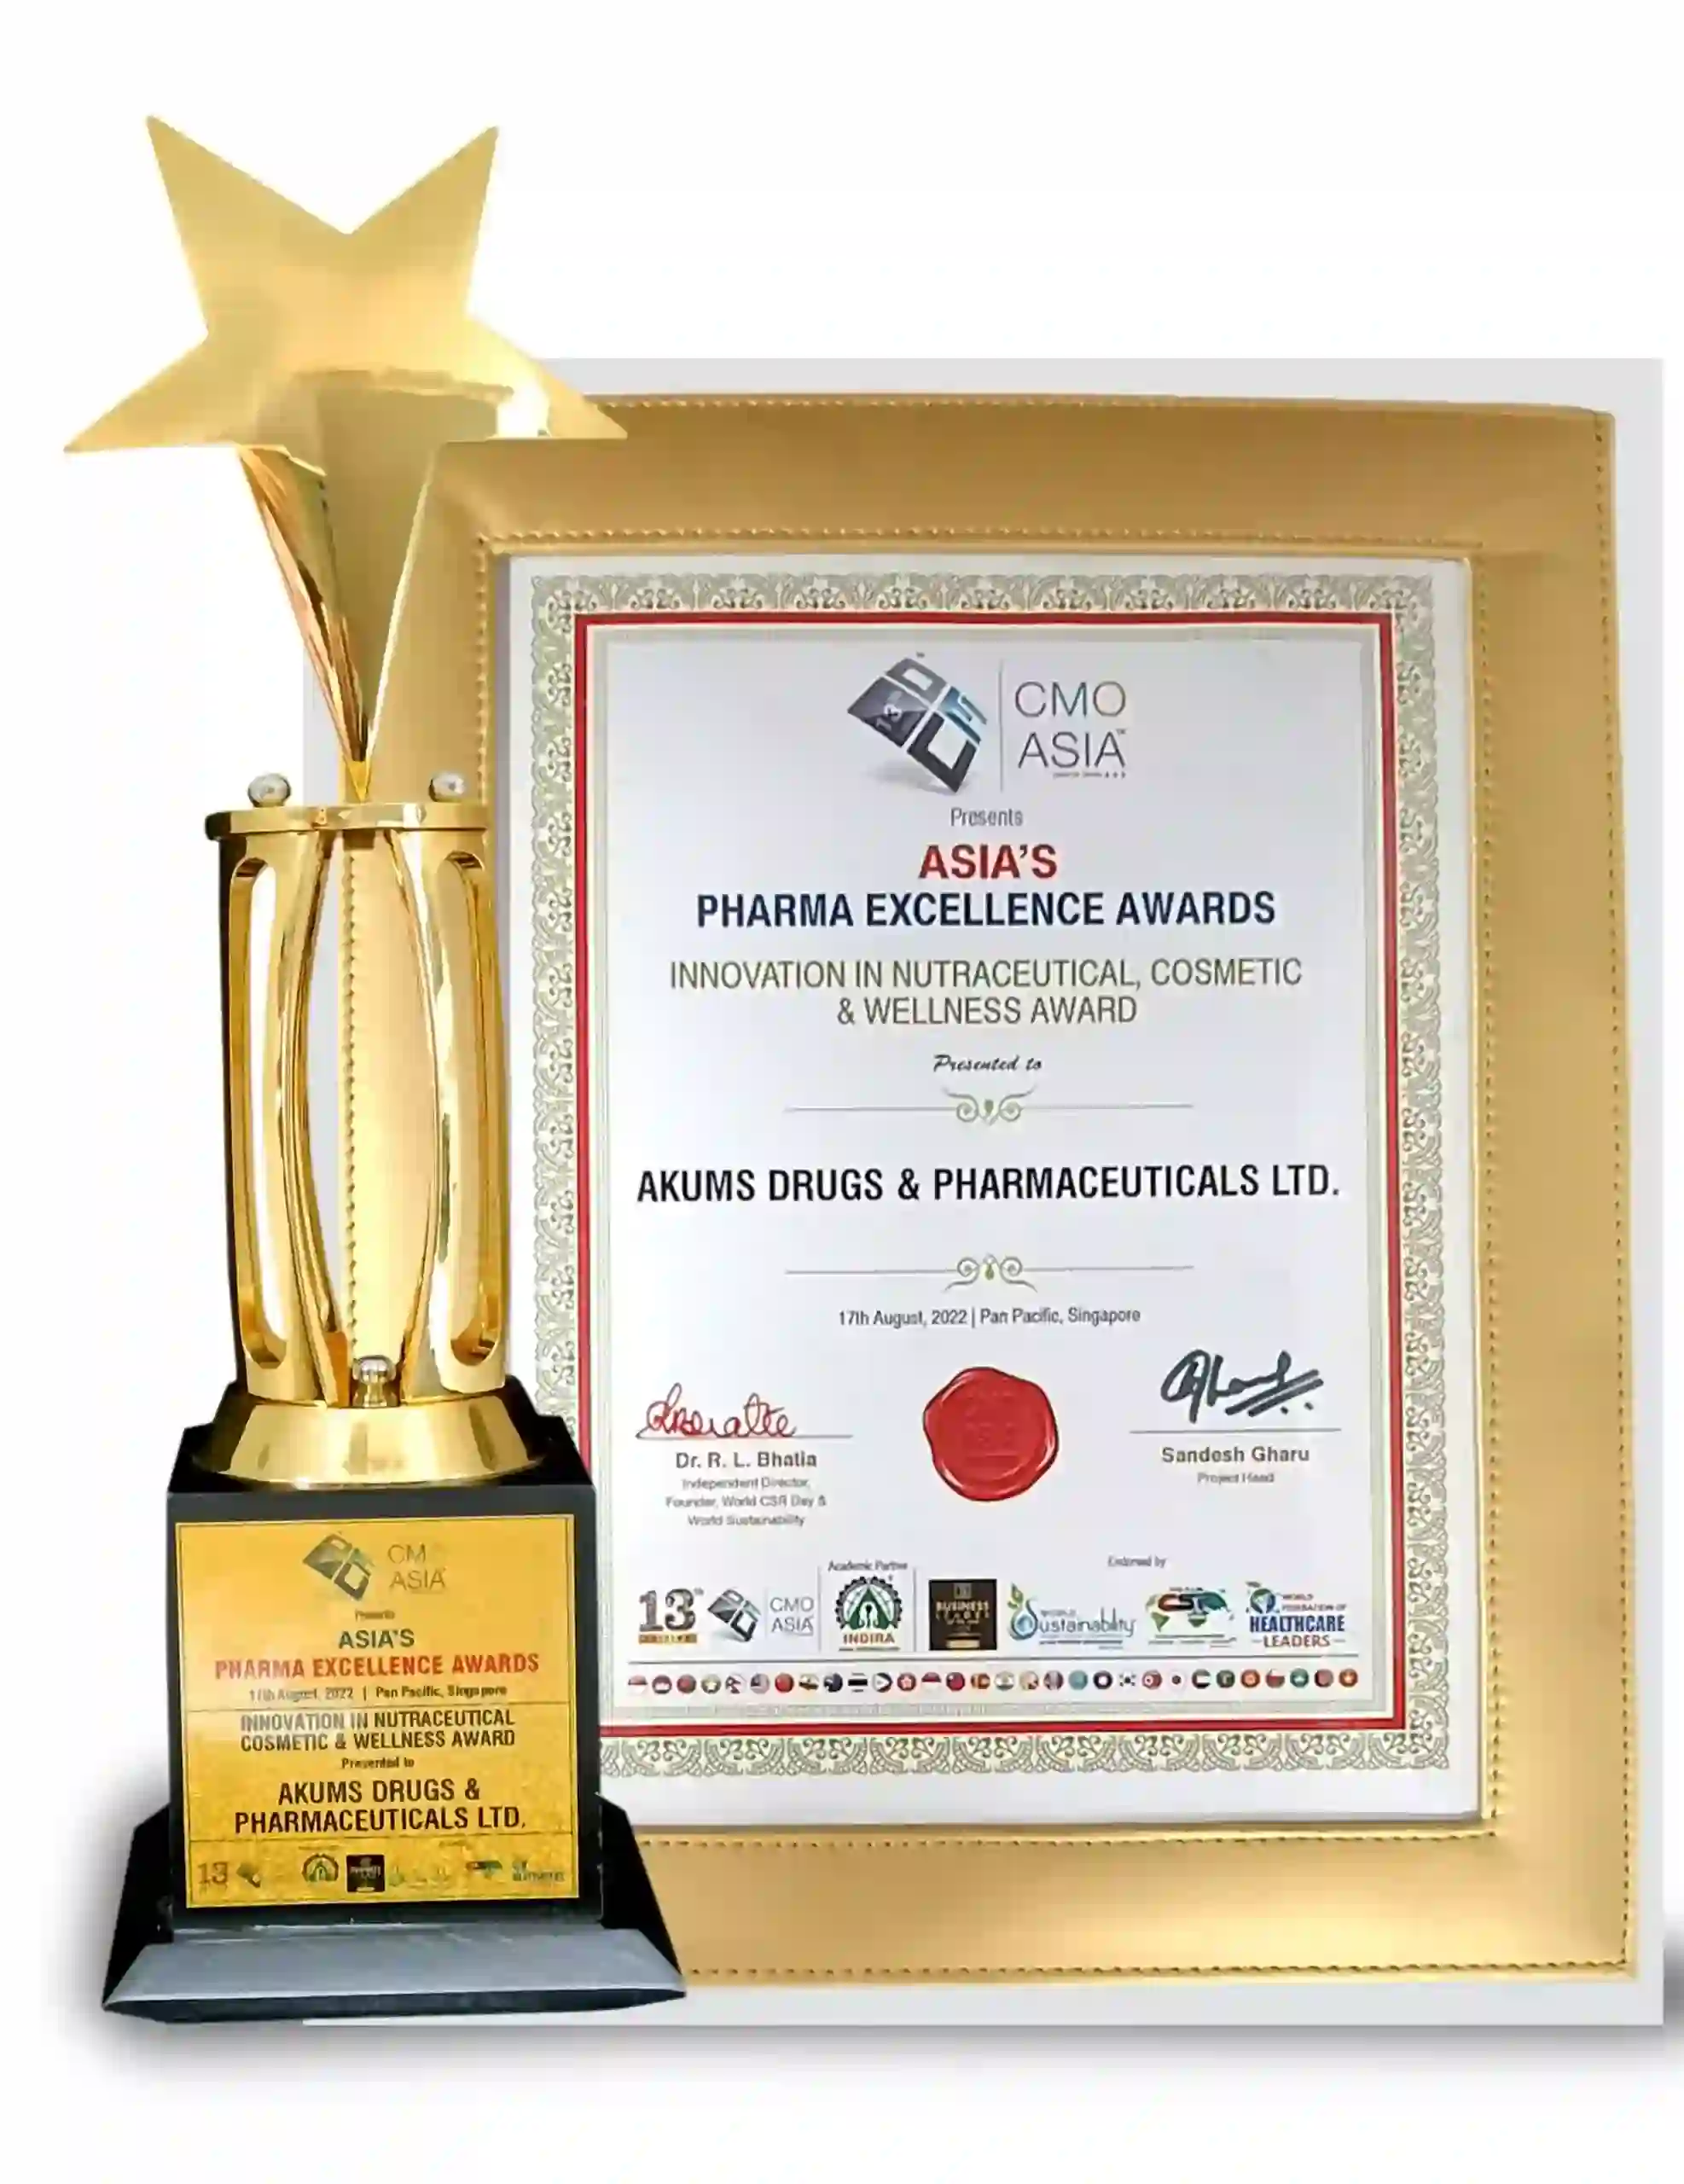 Akums awarded as Innovation-in-Nutraceutical-Cosmetic-Wellness-Award-2022-by-CMO-Asia